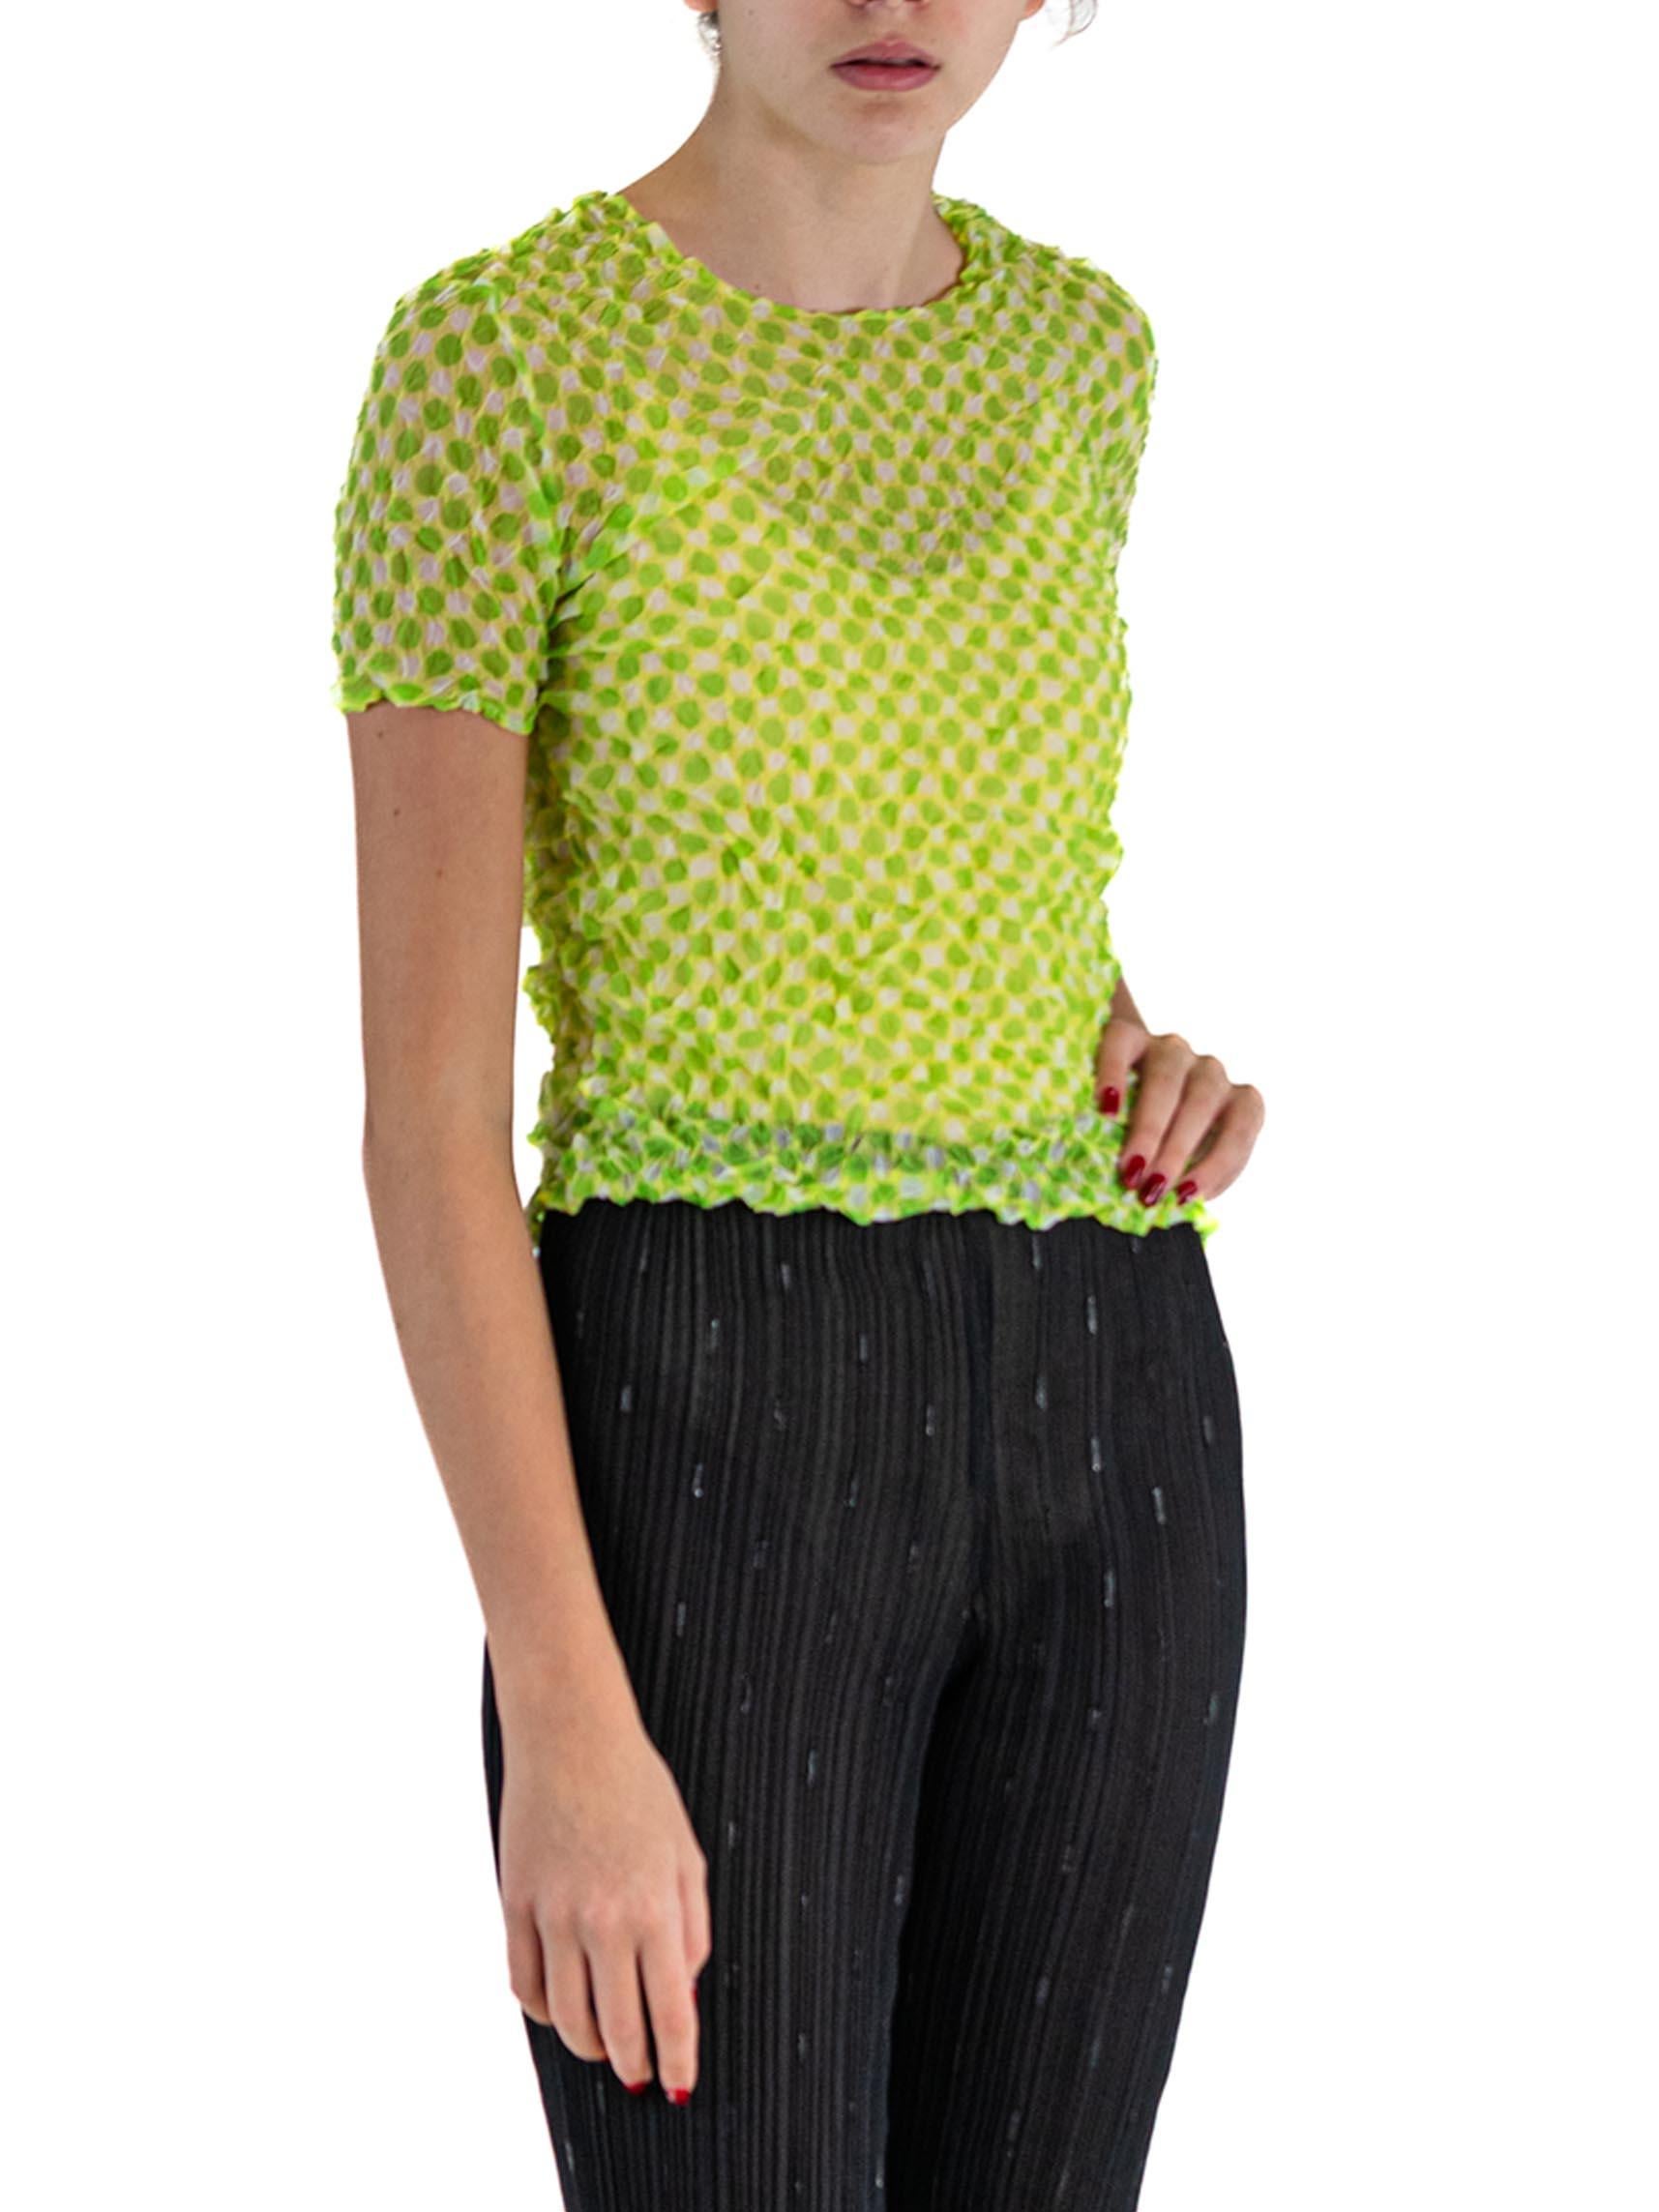 1990S ISSEY MIYAKE Lime Green Sheer Polyester Shrink Wrap Top With Polka Dots For Sale 2